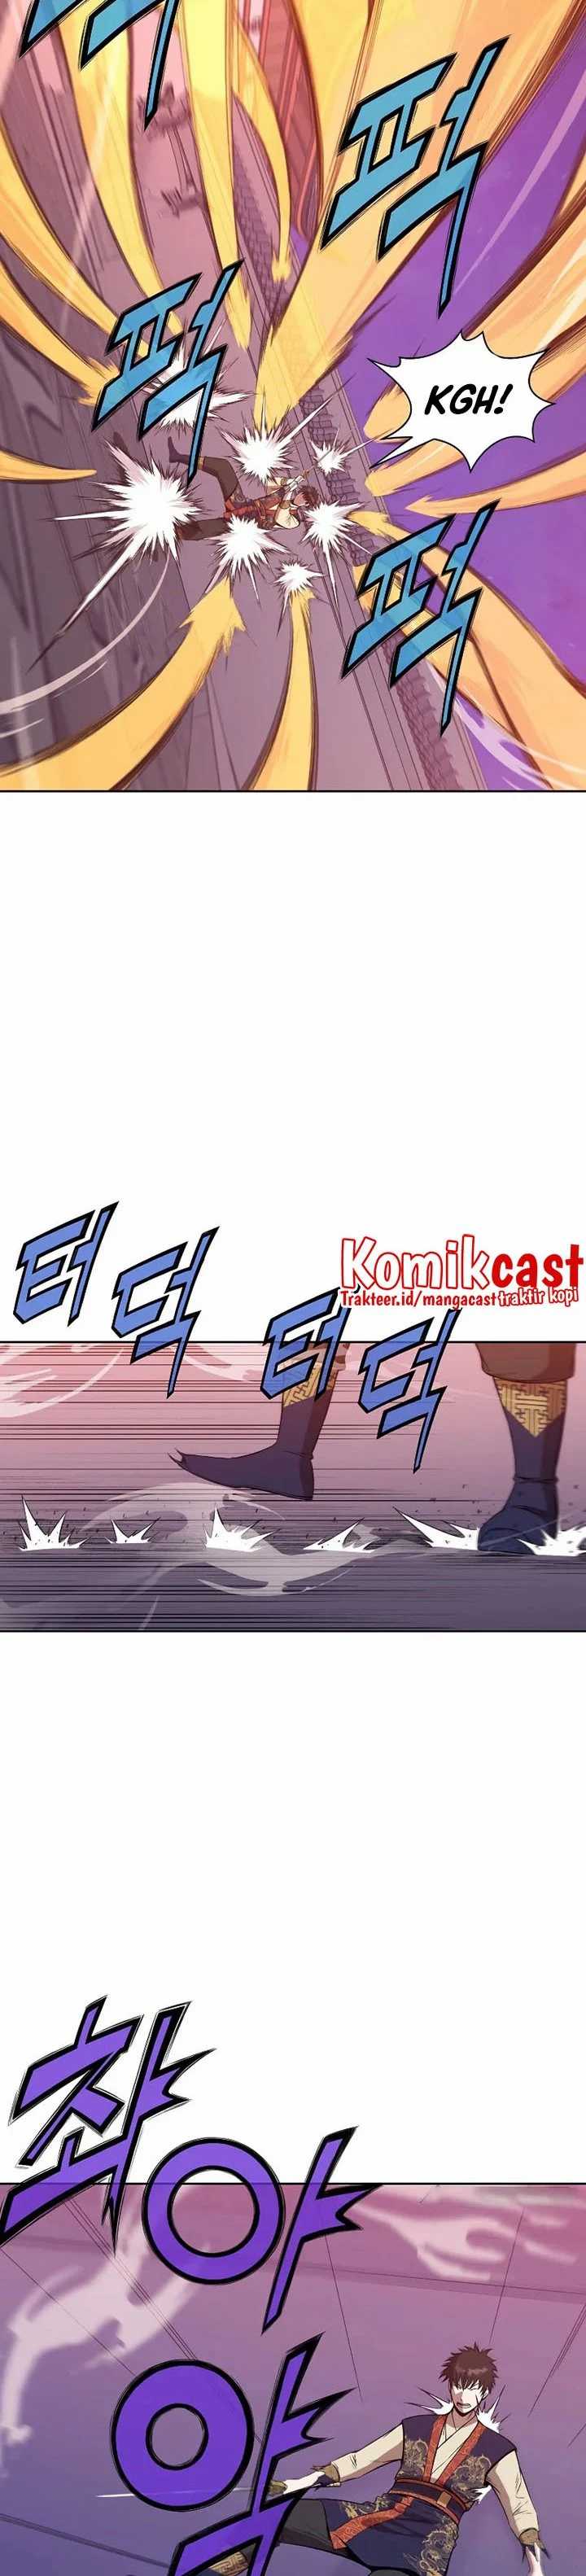 Heavenly Martial God Chapter 62